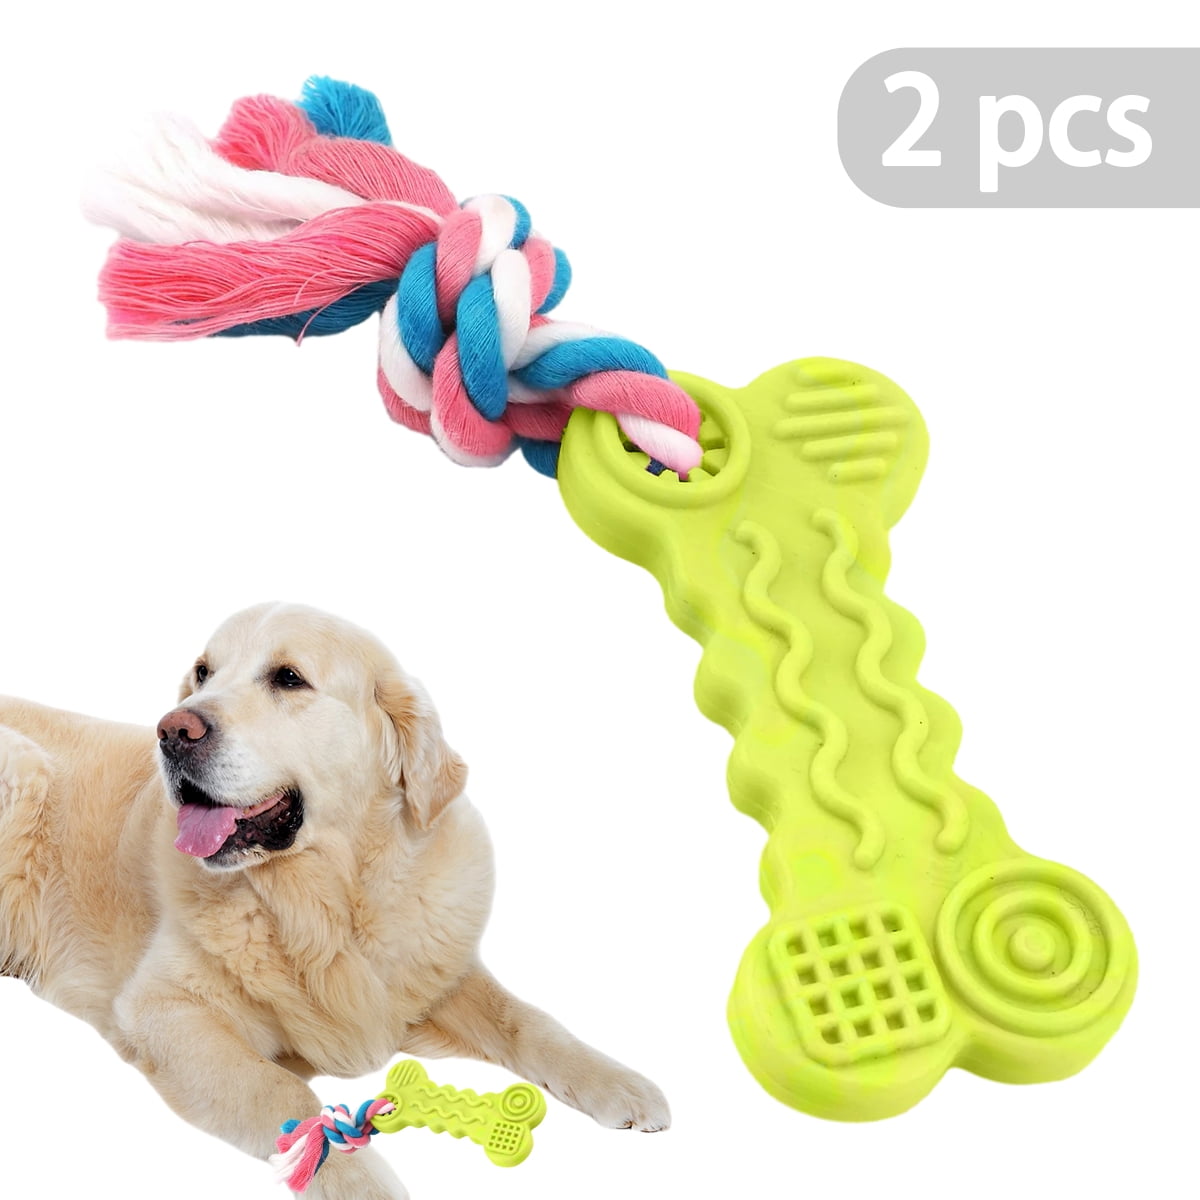 2 Pack Puppy Chew Toys Dog Durable